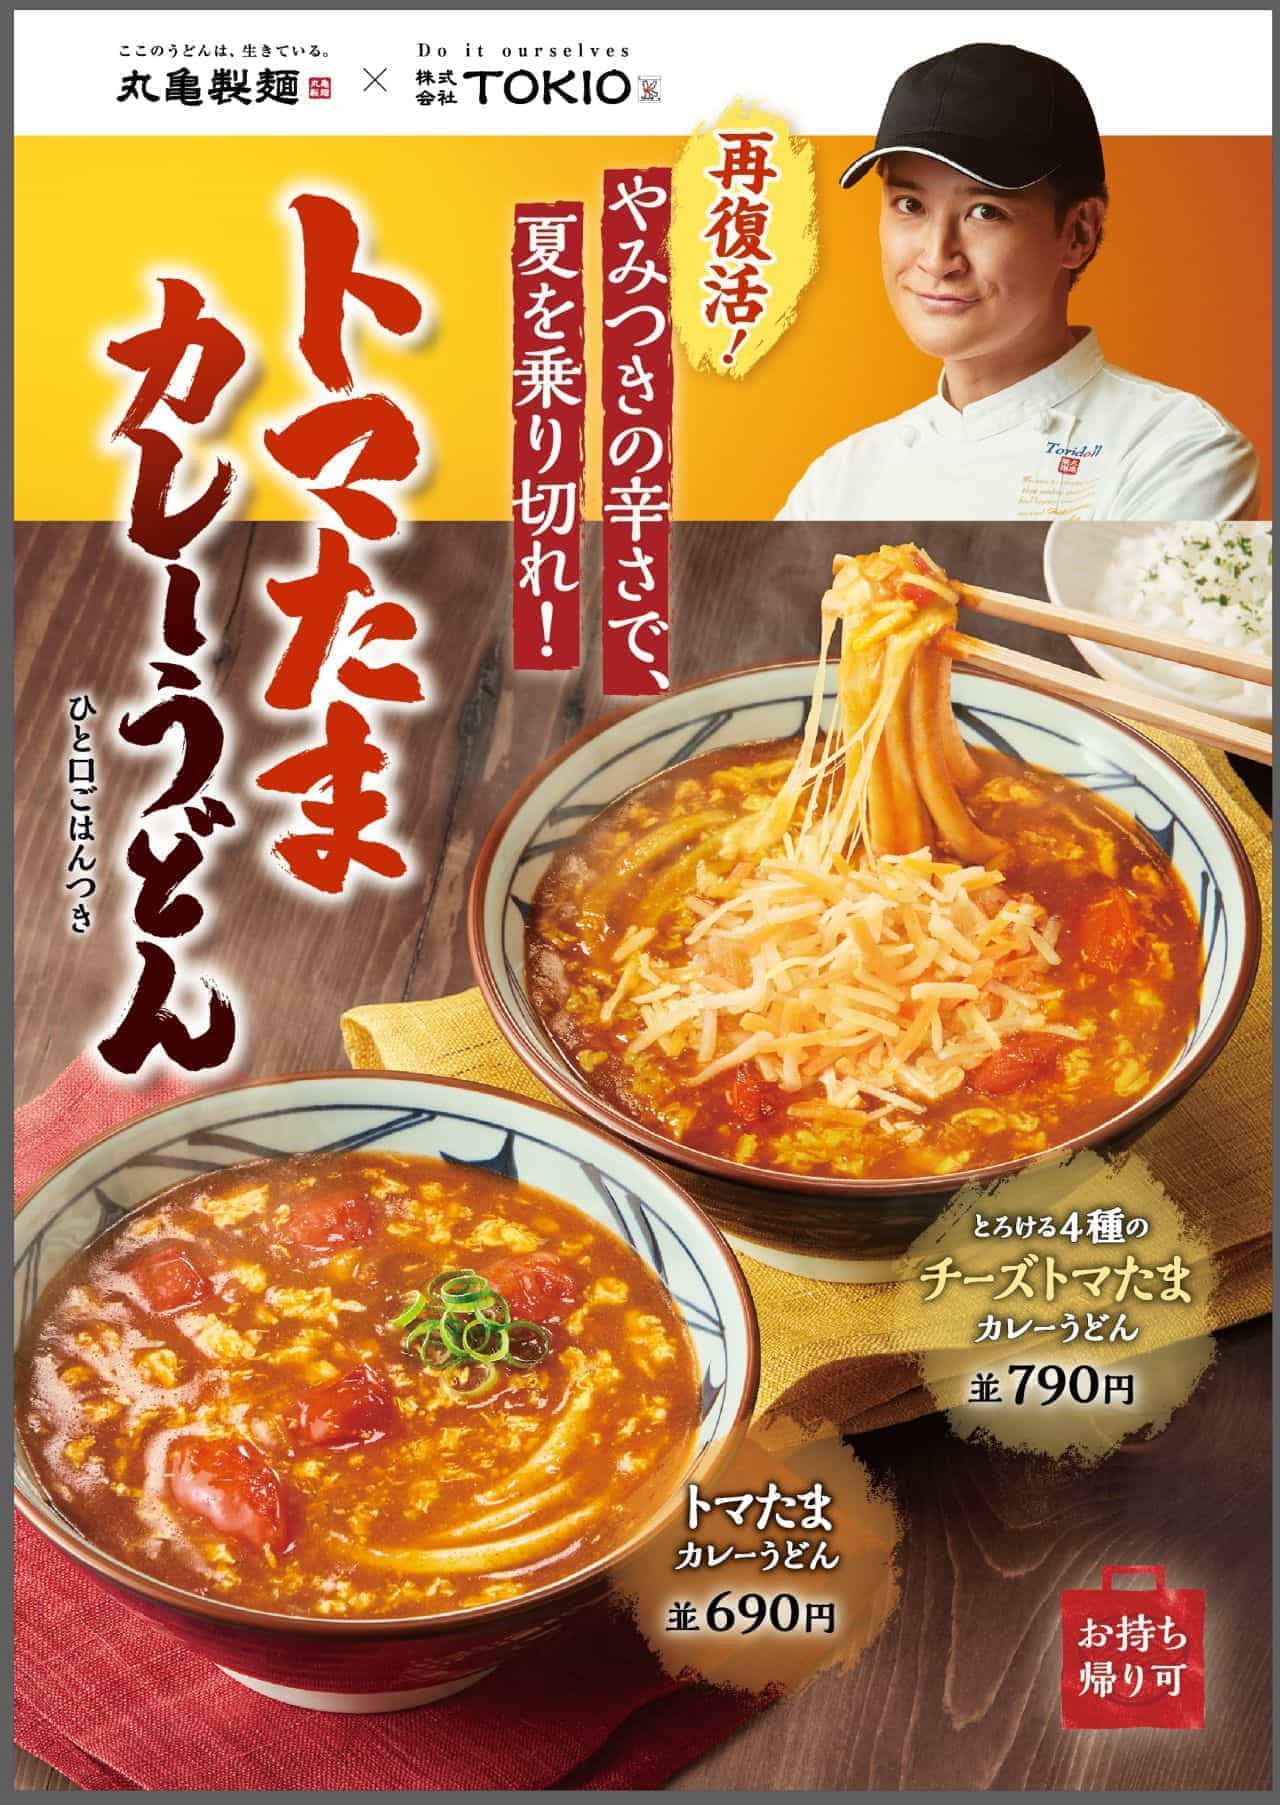 Marugame Seimen "Tomatama Curry Udon" and "Melted 4 Cheese Tomatama Curry Udon